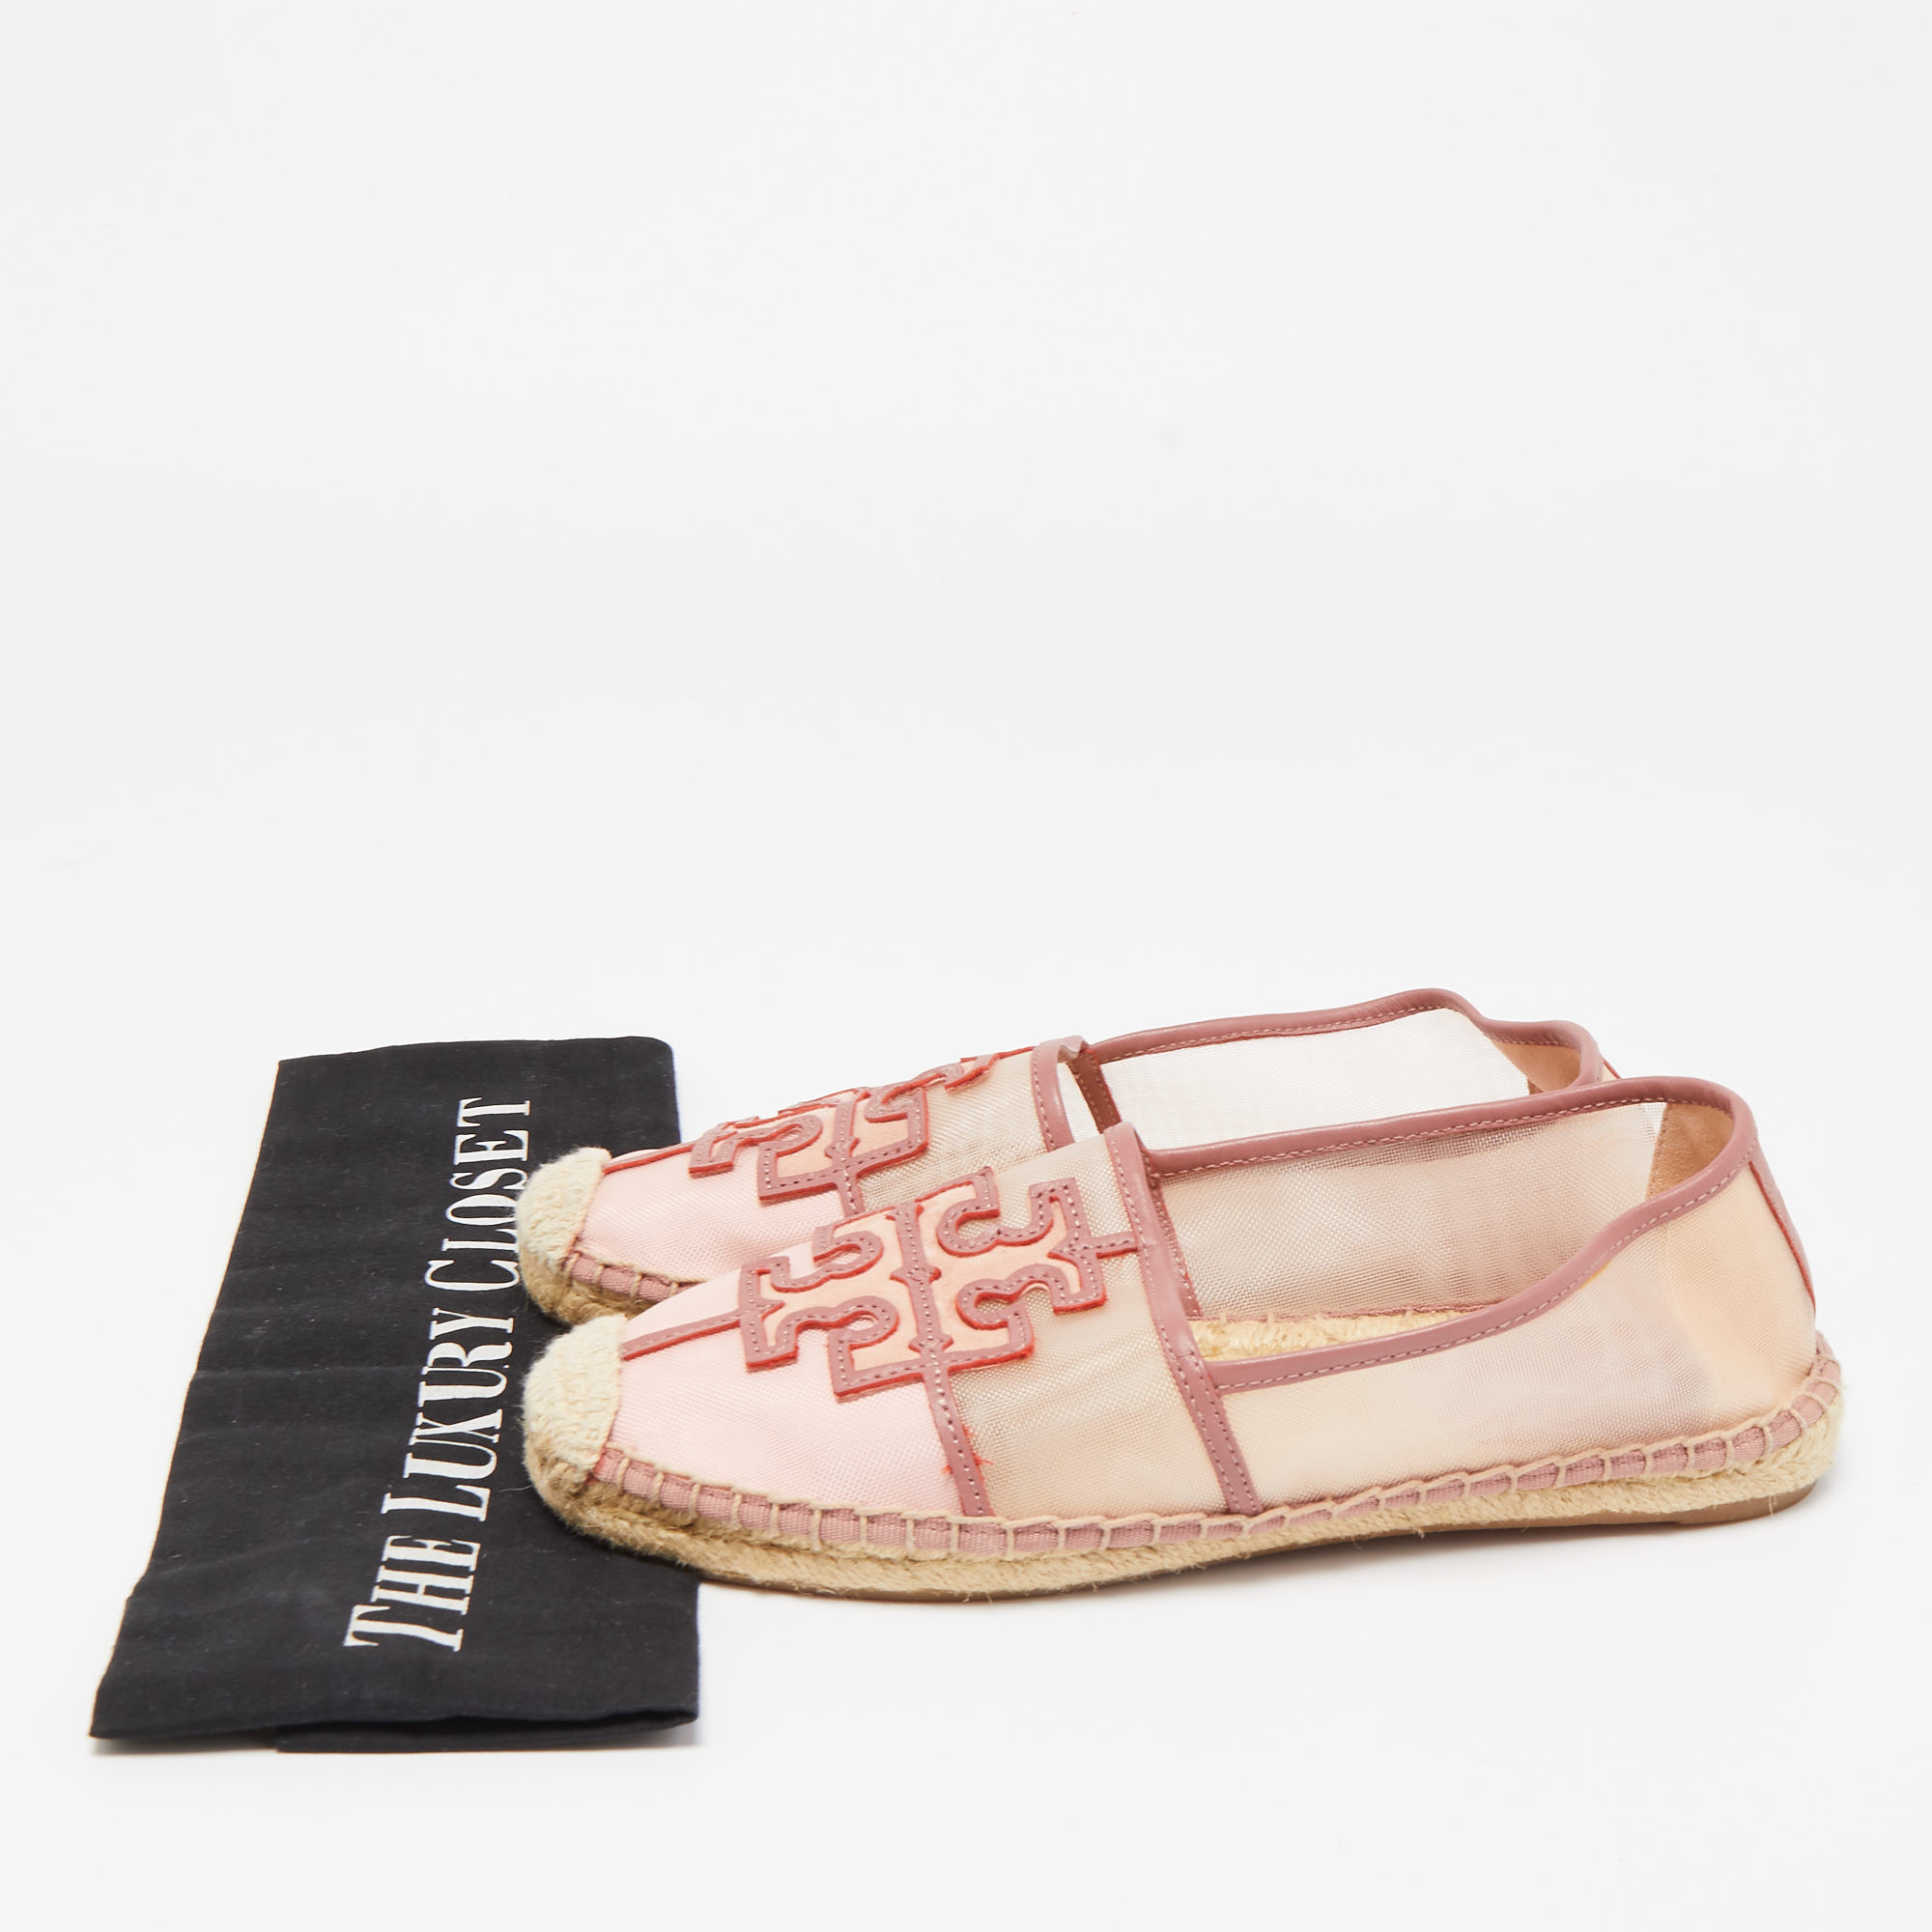 Tory Burch Pink Mesh And Leather Espadrilles Flats Size 37.5